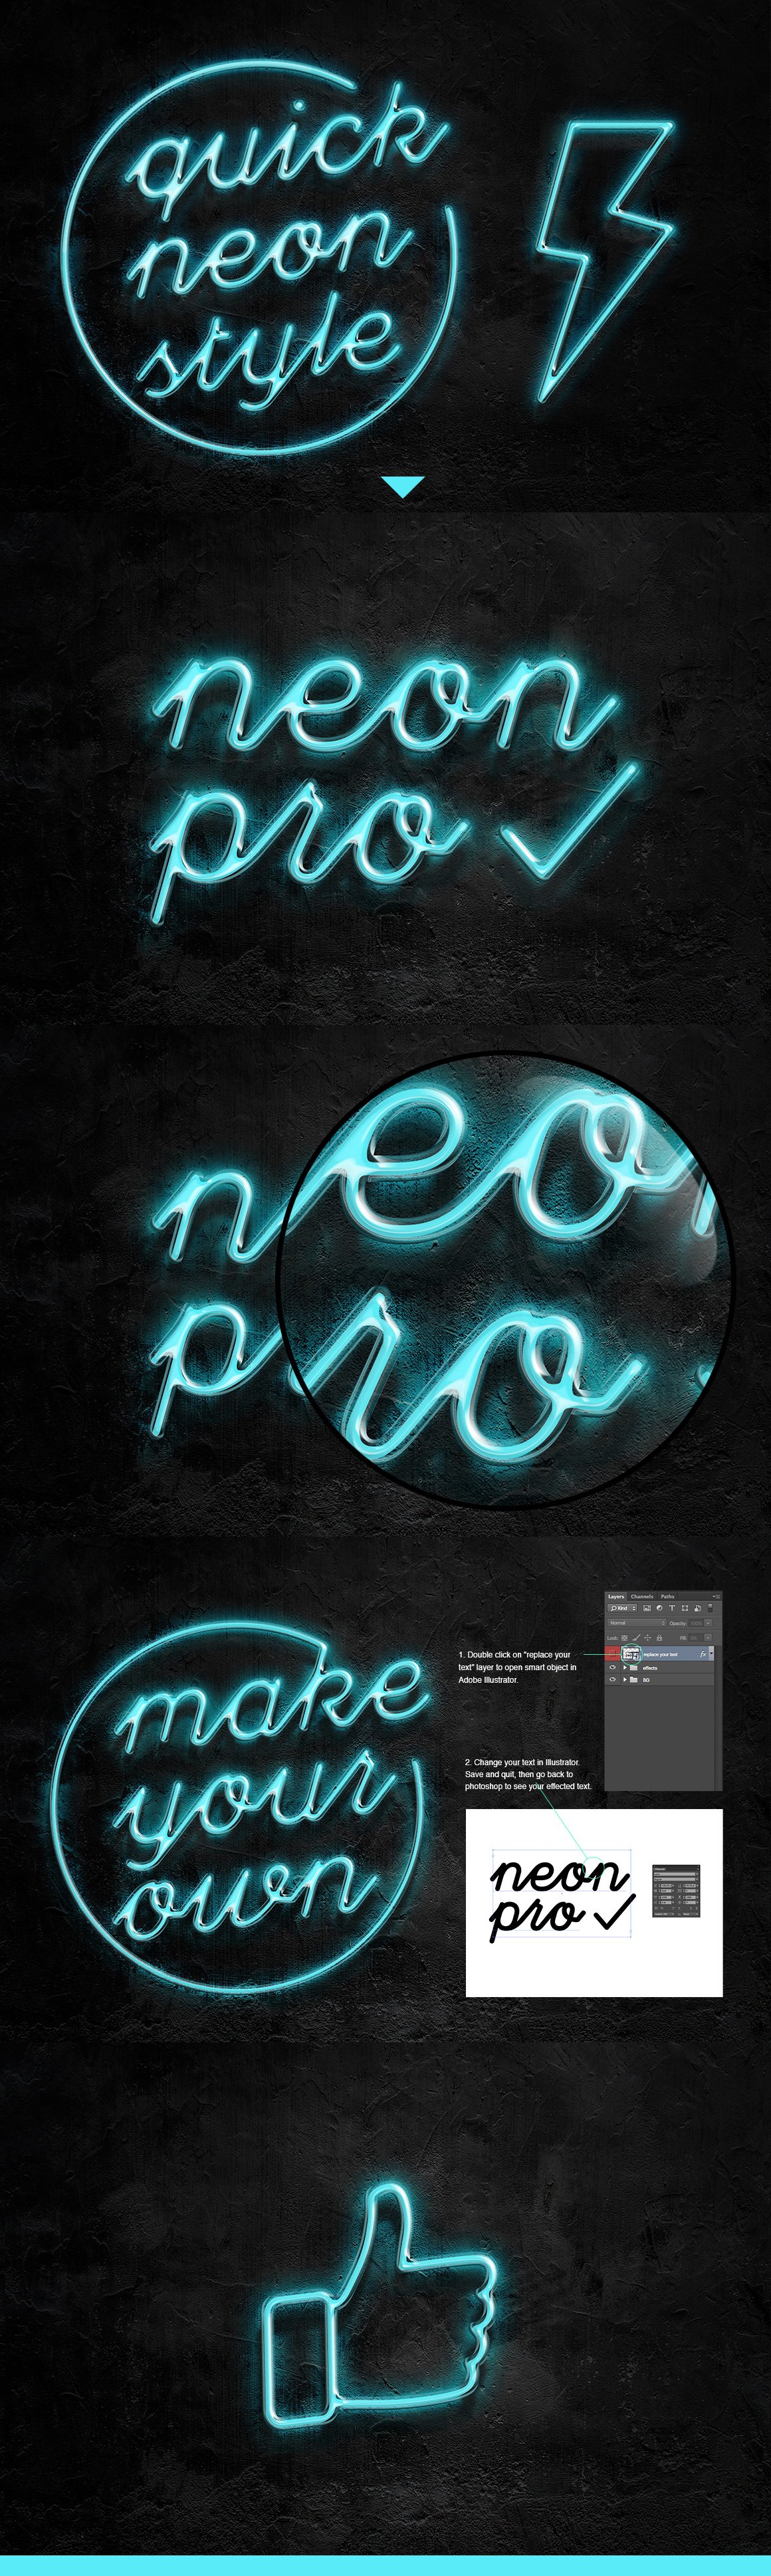 Neon Pro text effectpreview image.